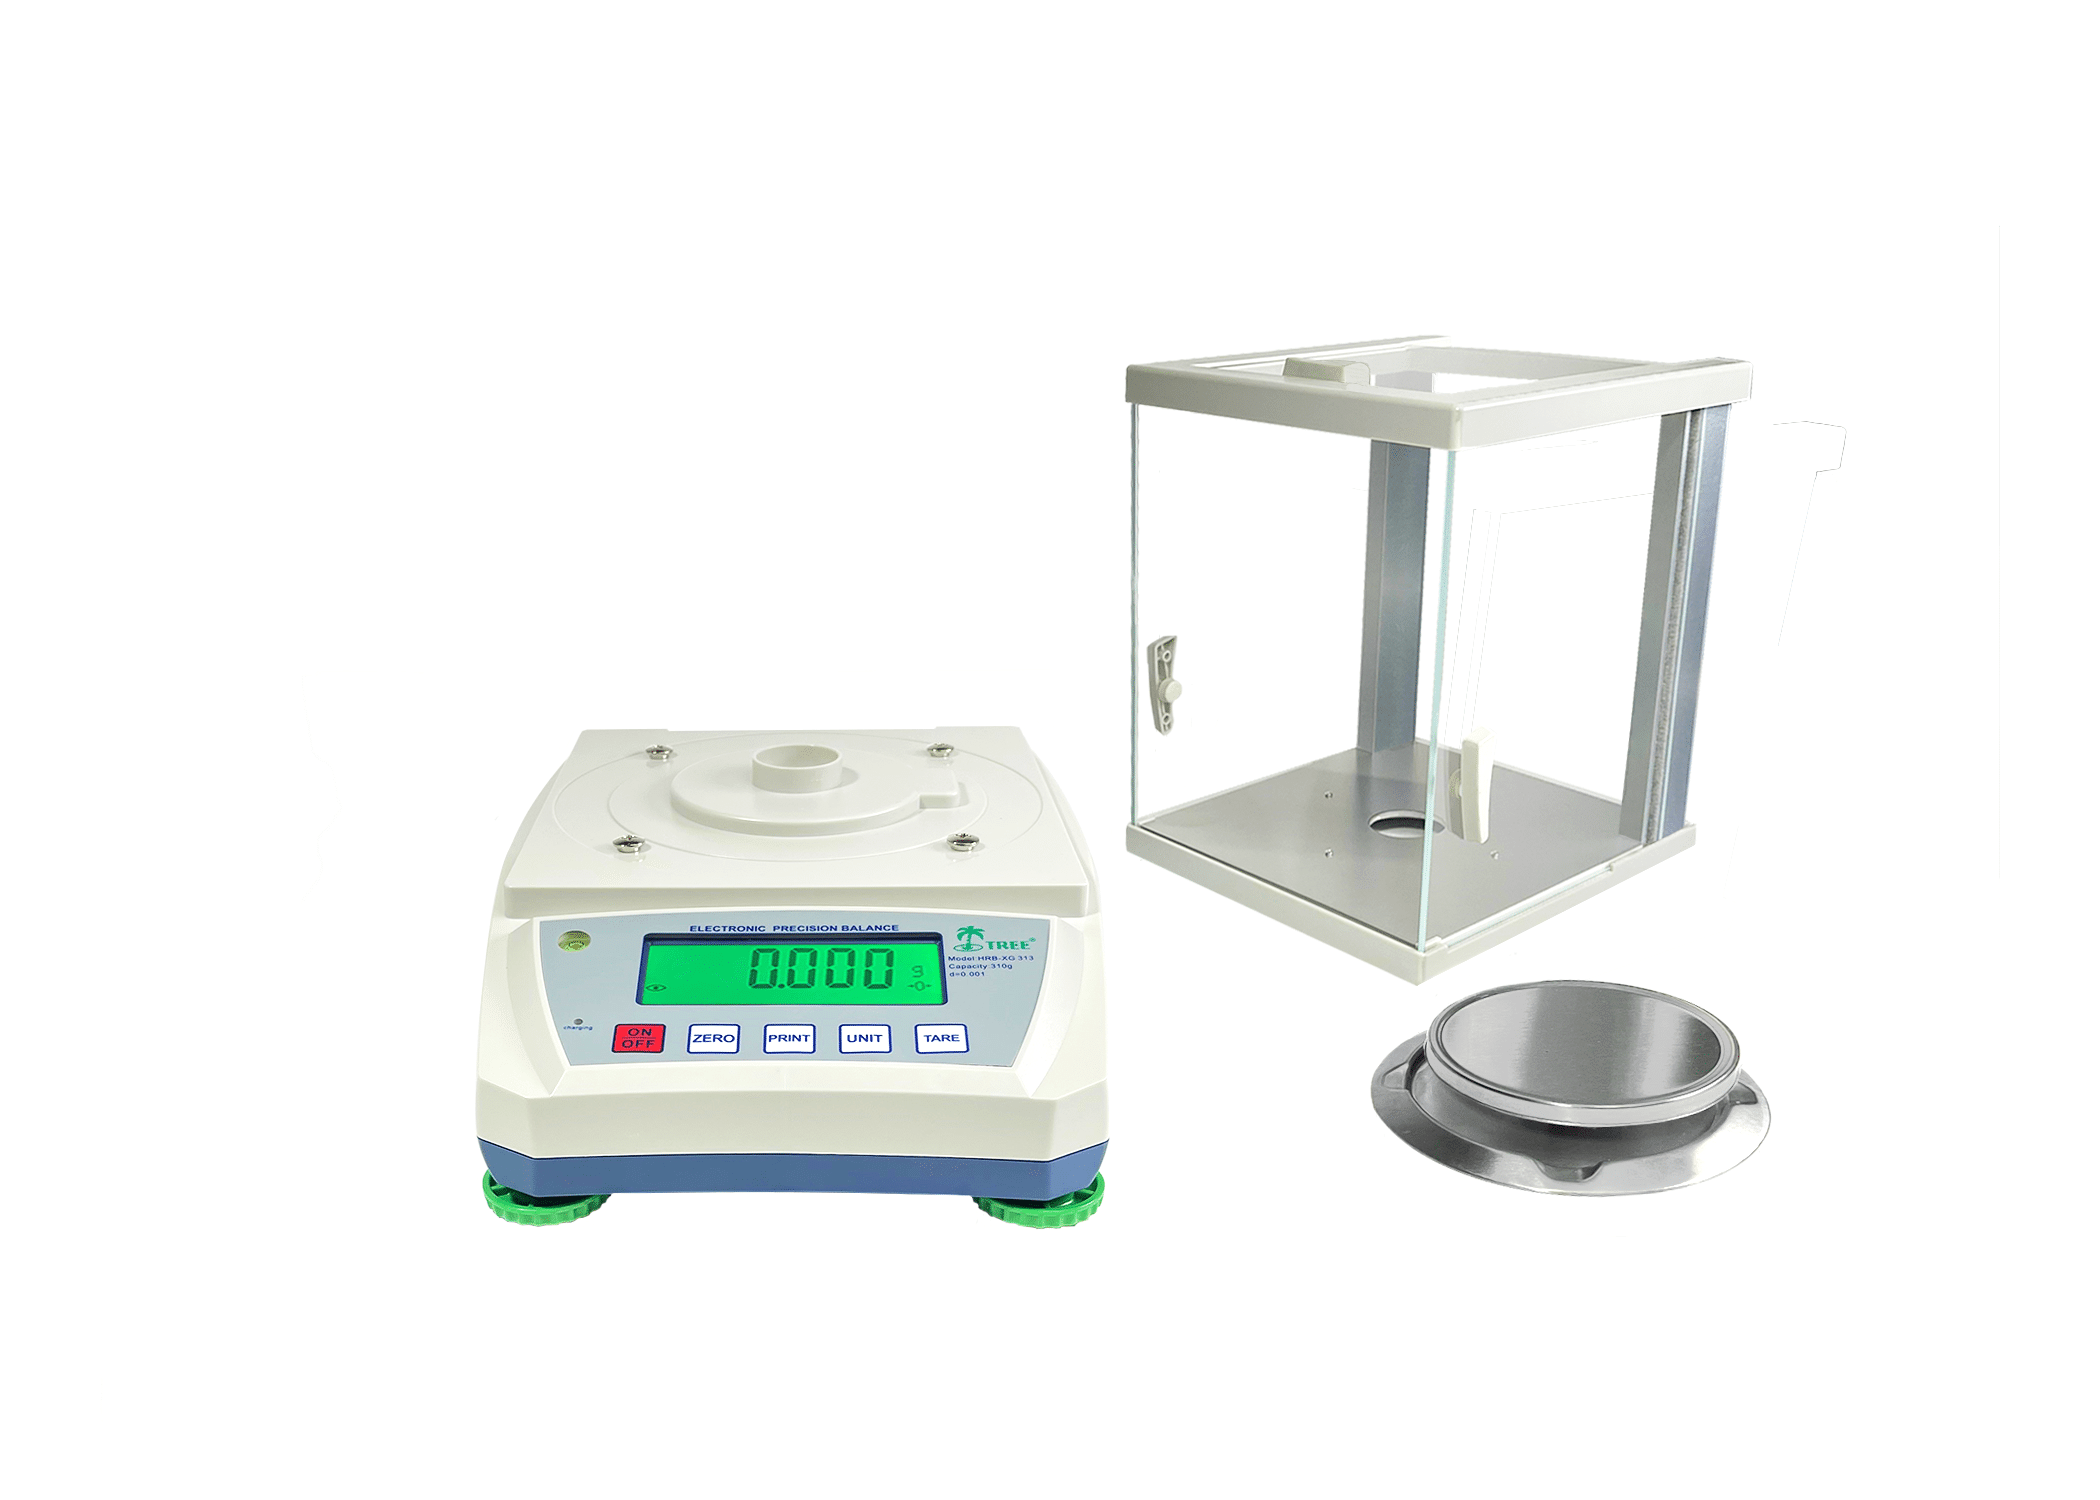 Tree HRB-S 313 Stainless Steel Precision Balance, 310 g x 0.001 g